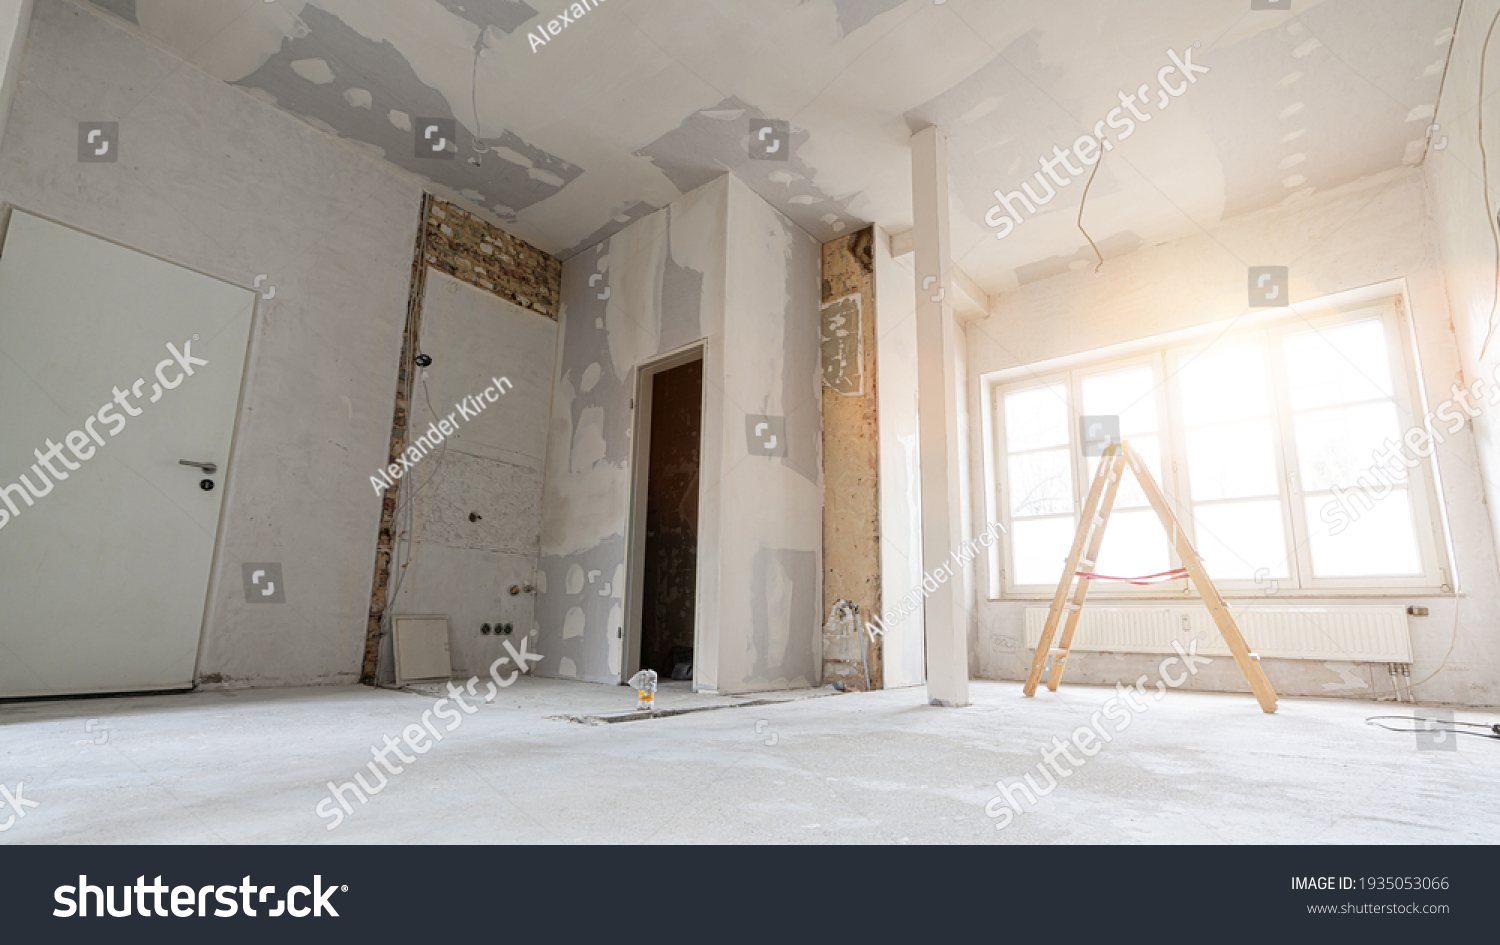 rebuilding an Old real estate apartment, prepared and ready for renovate #1935053066